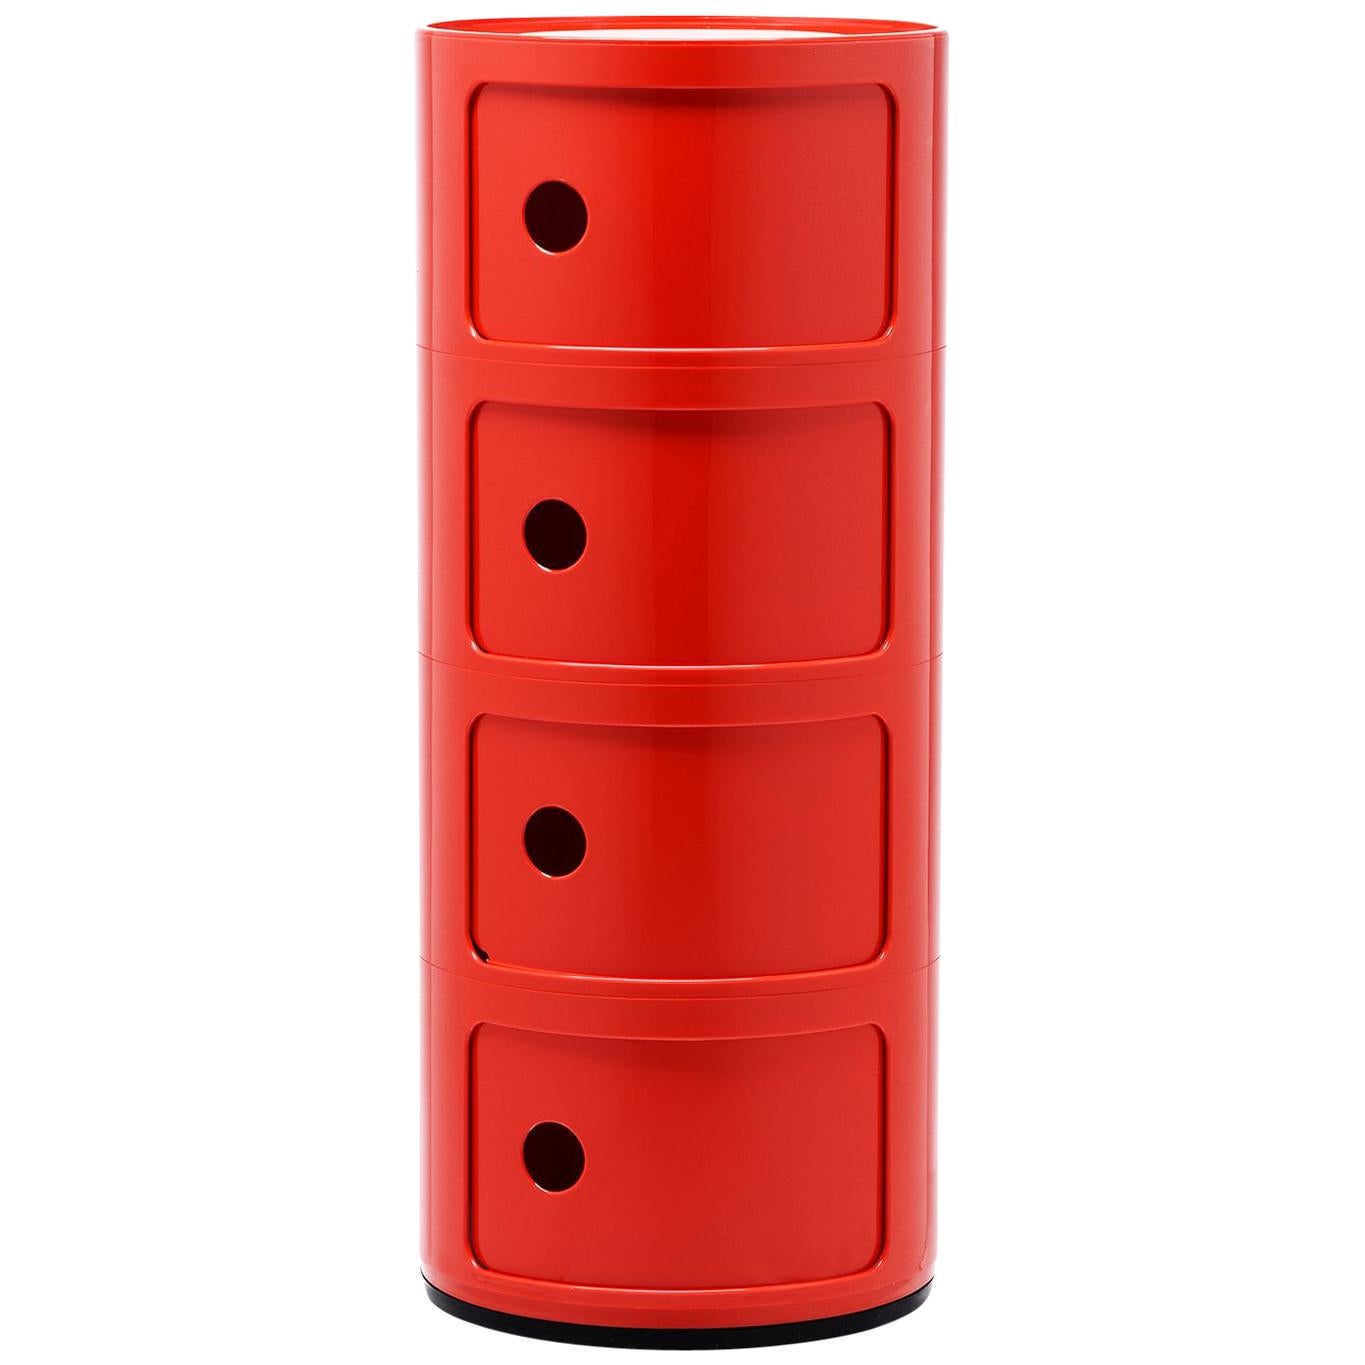 Kartell Componibili 4-Tier Drawer in Red by Anna Castelli Ferrieri For Sale